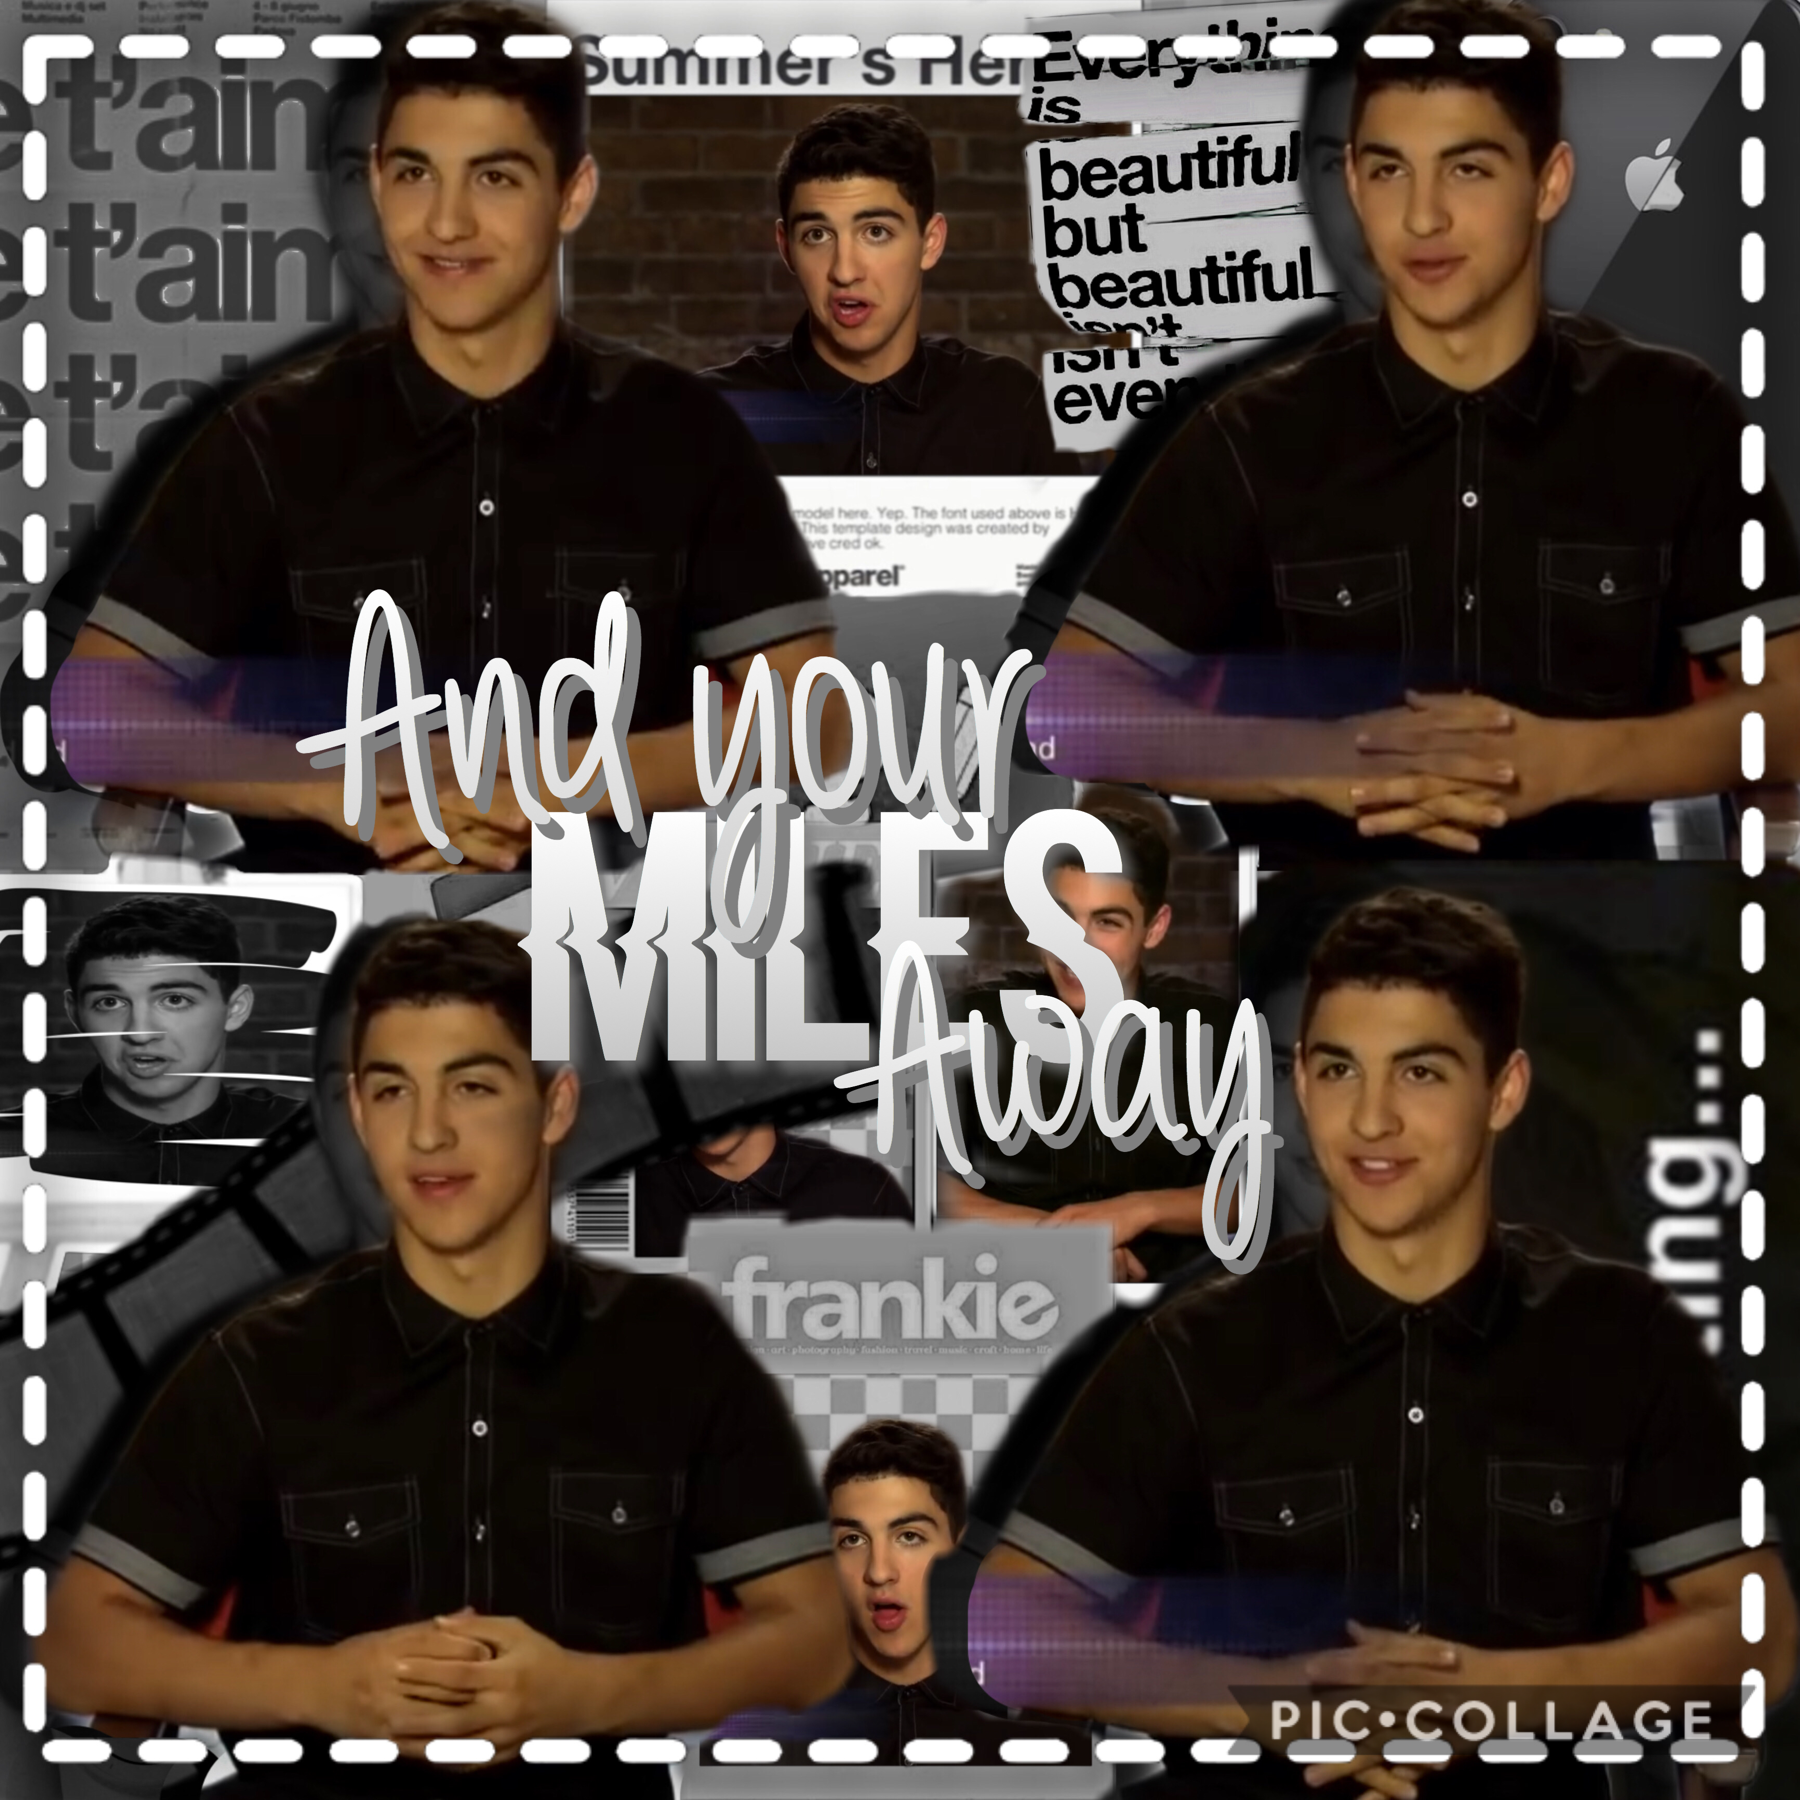 New complex edit! Tap

The Next Step, James.....
Please follow and like and if you want comment. Please go follow all my other accounts and follow me on picsart!!! 🖤